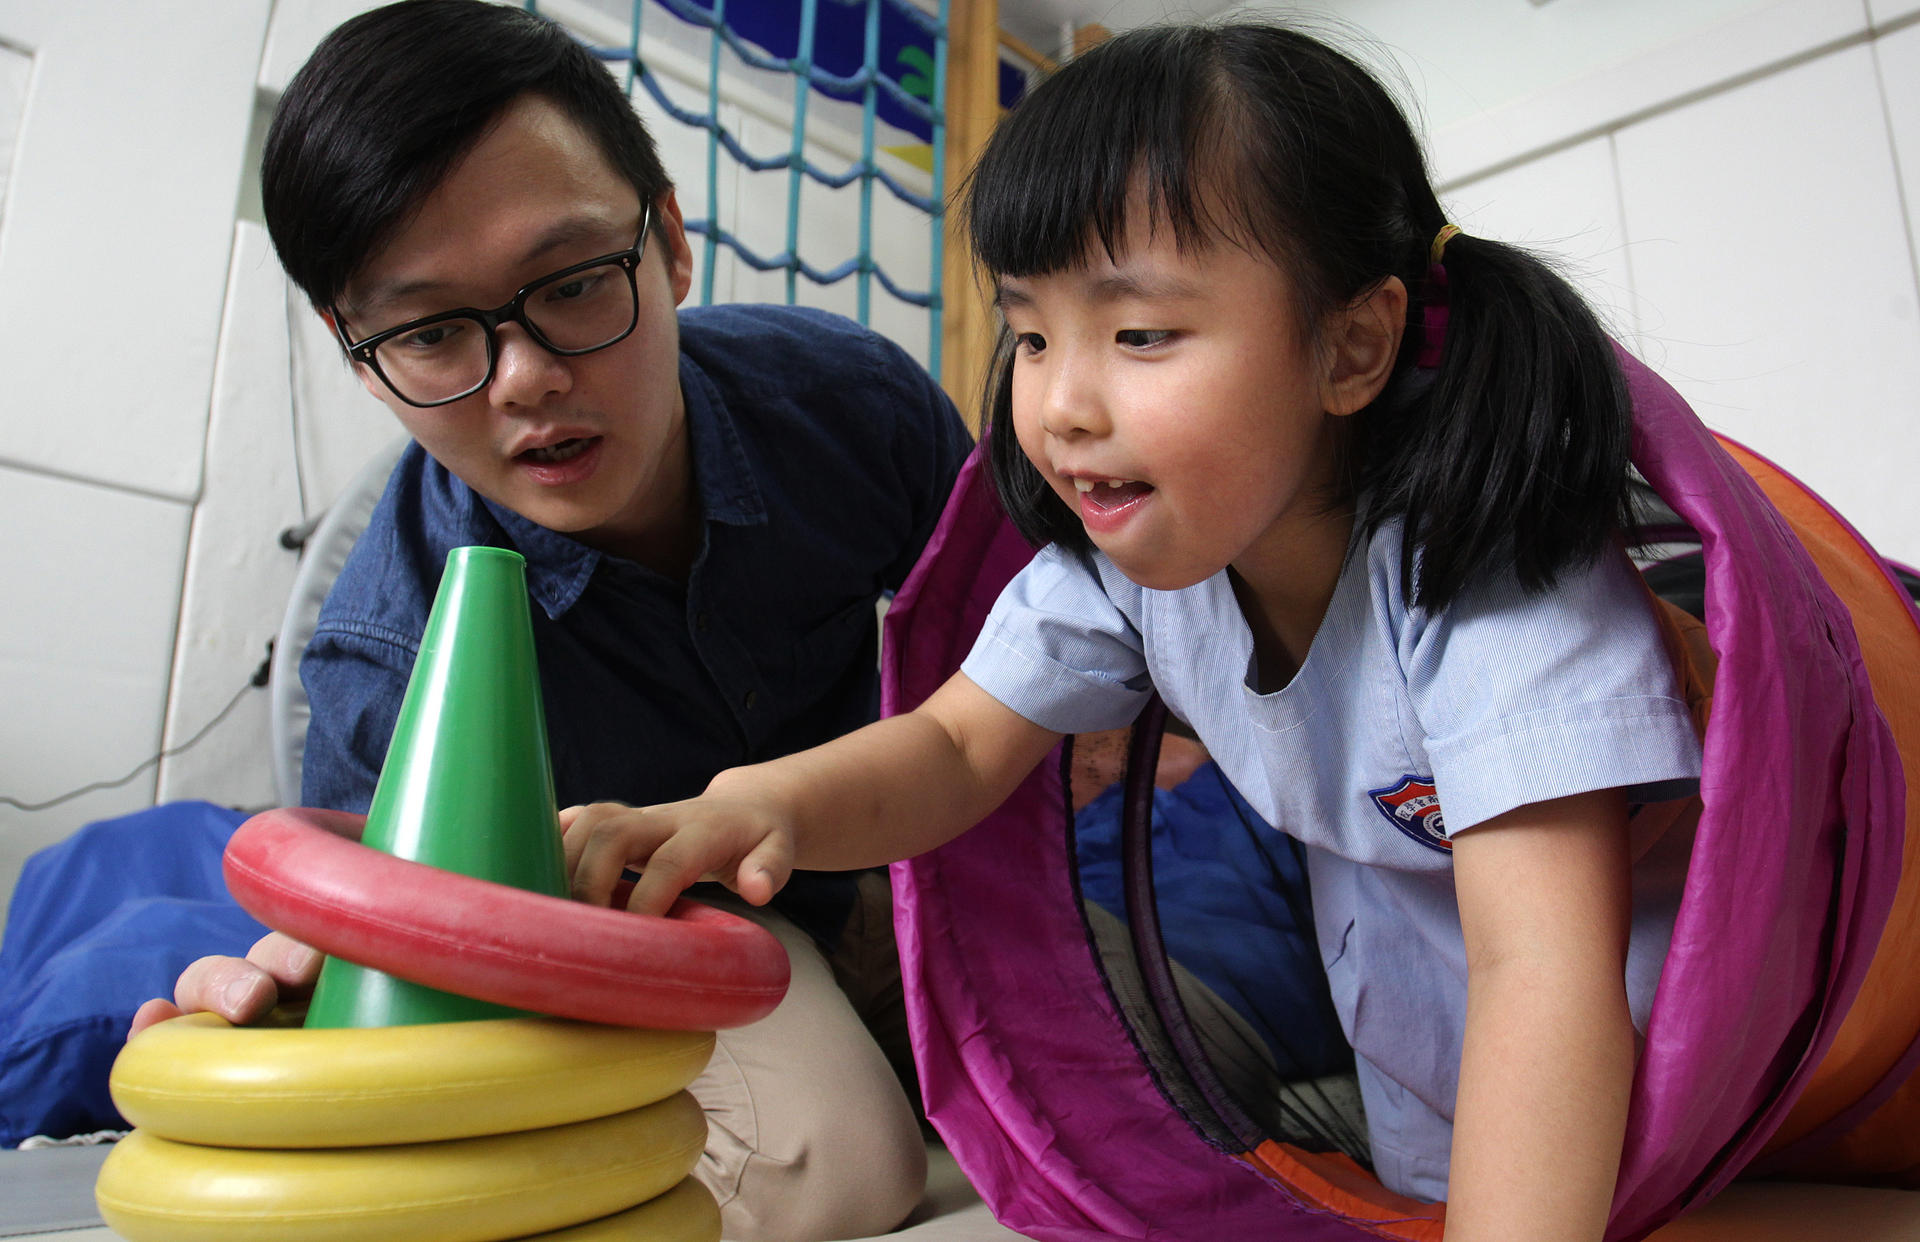 Occupational therapist Steve Chan (left) and six-year-old Sasa Lao at the Rainbow Project's learning centre on Sai Yuen Lane in Western. Photo: Dickson Lee